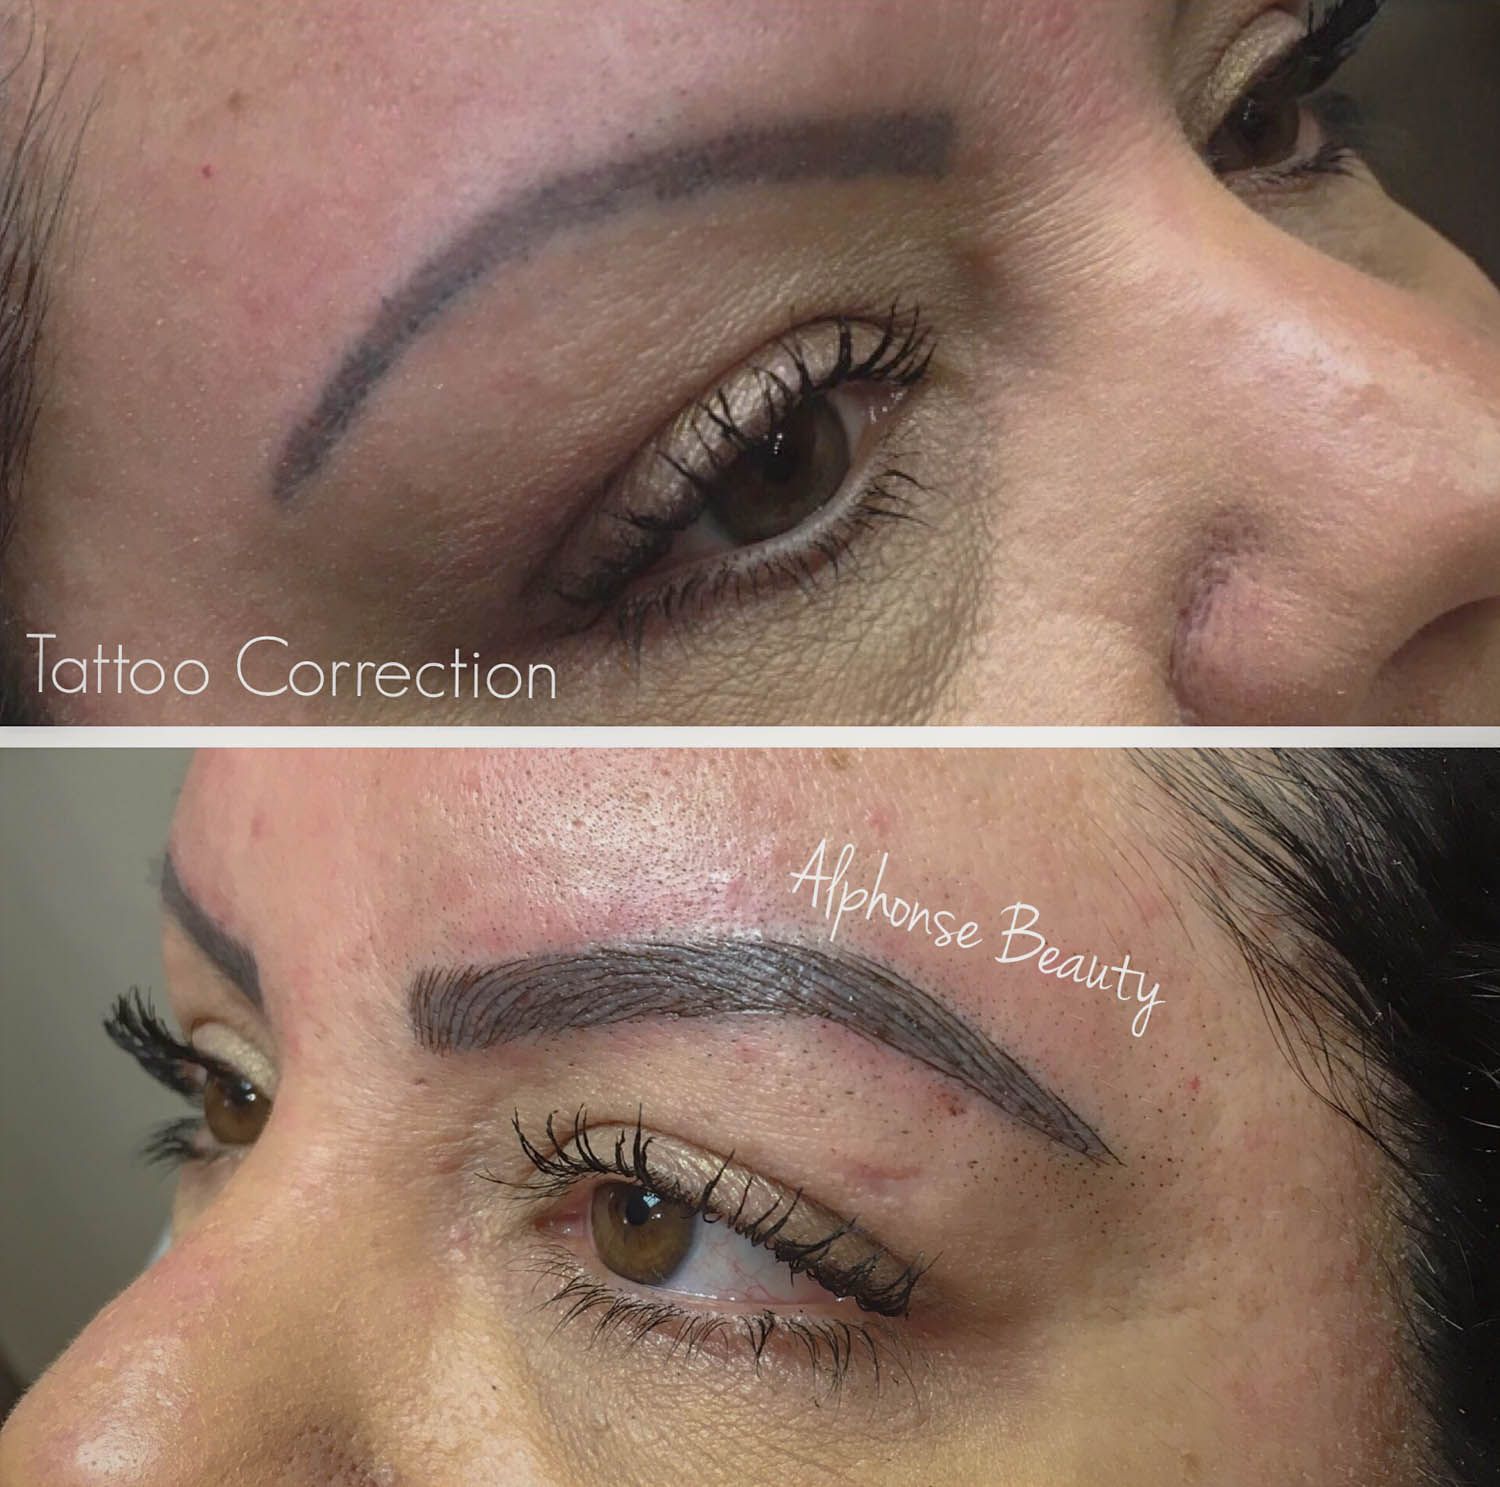 CORRECTIONTATTOO REMOVAL